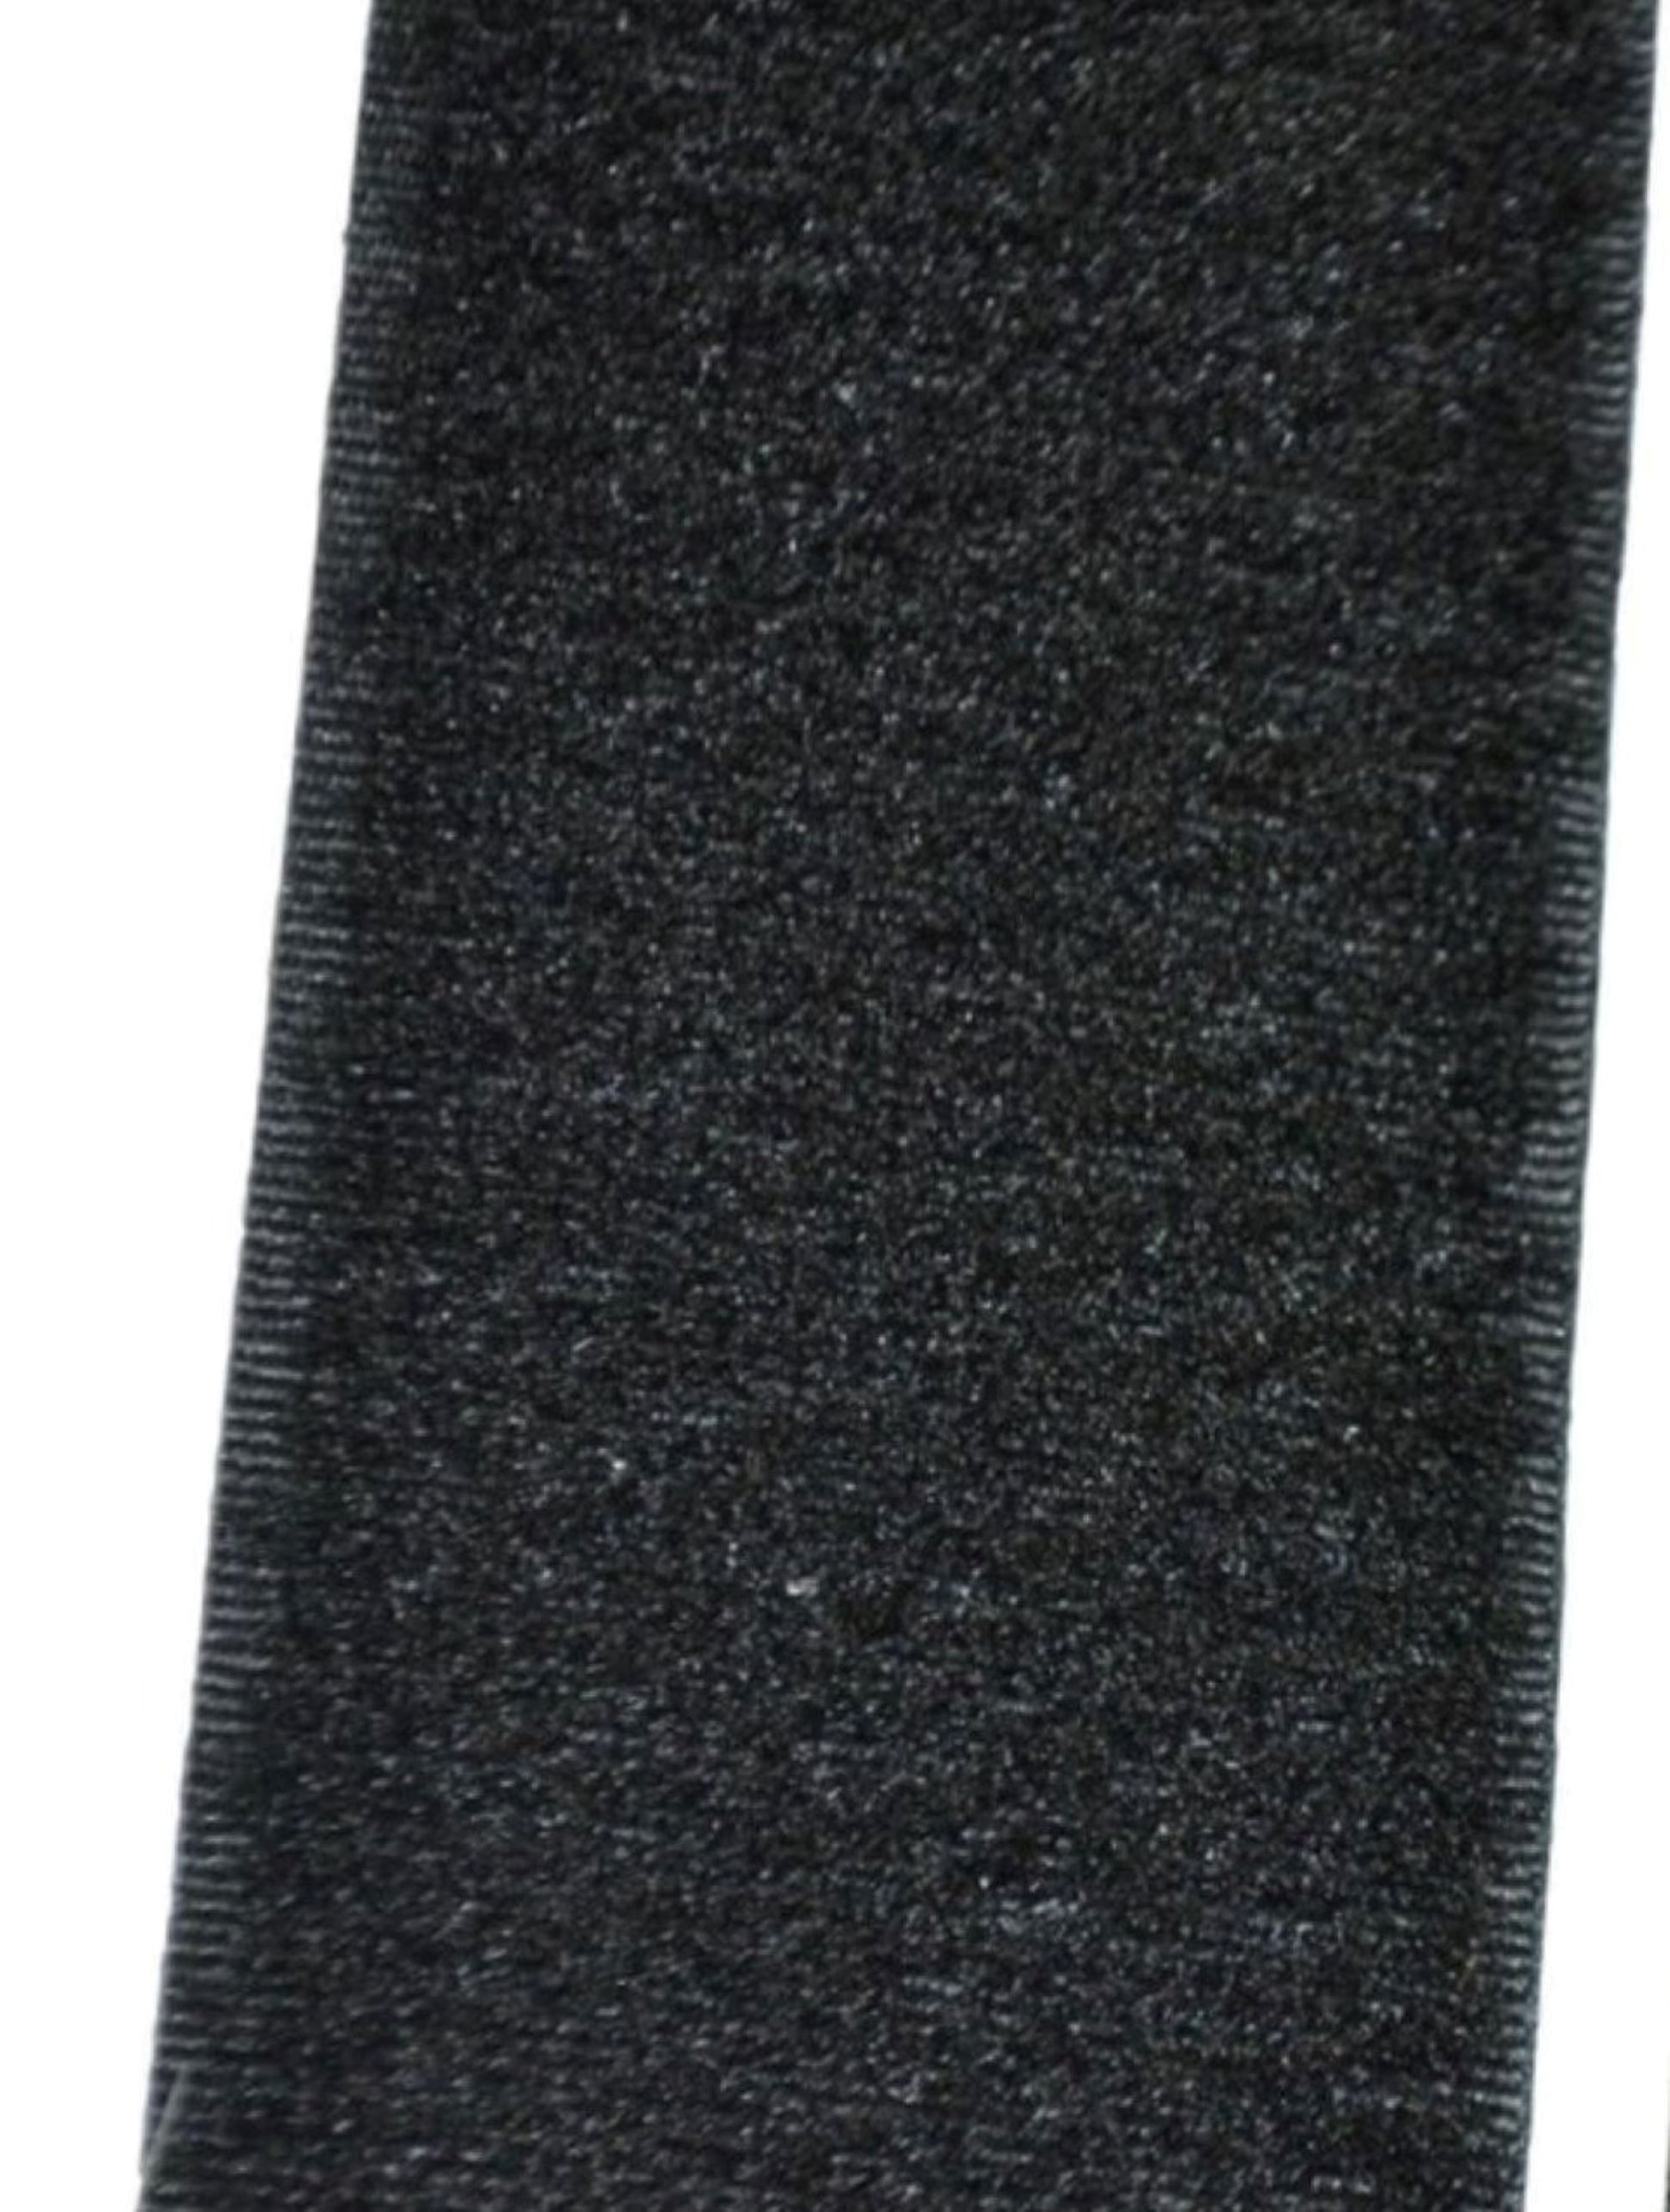 2 Inch Velcro Roll for upholstery projects on sale adhesive-backed loop  only - Black – Sobie Fabrics